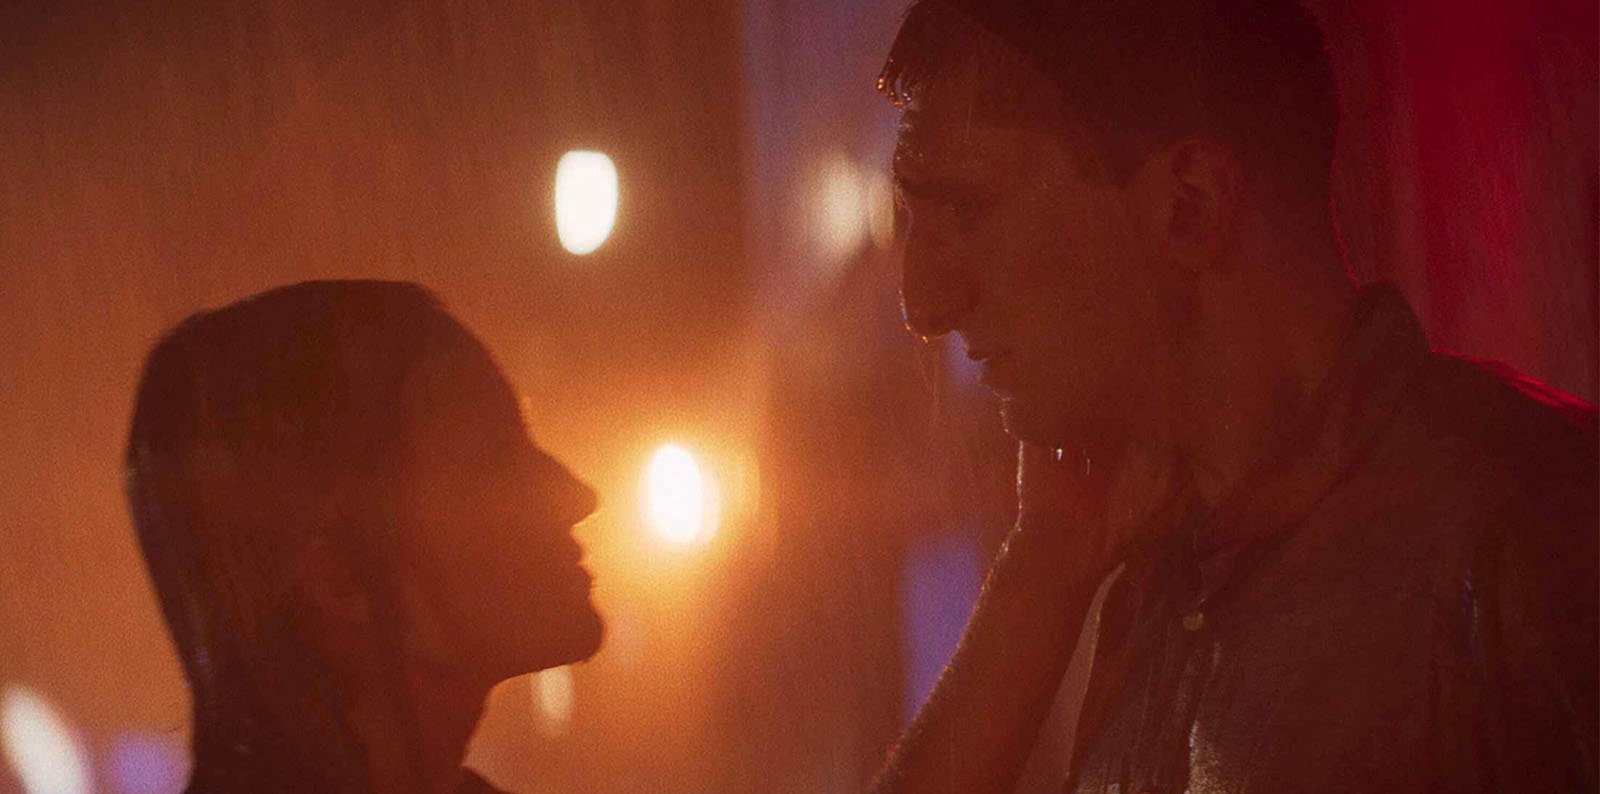 A still from 'Inside the Rain' featuring stars Ellen Toland and Aaron Fisher